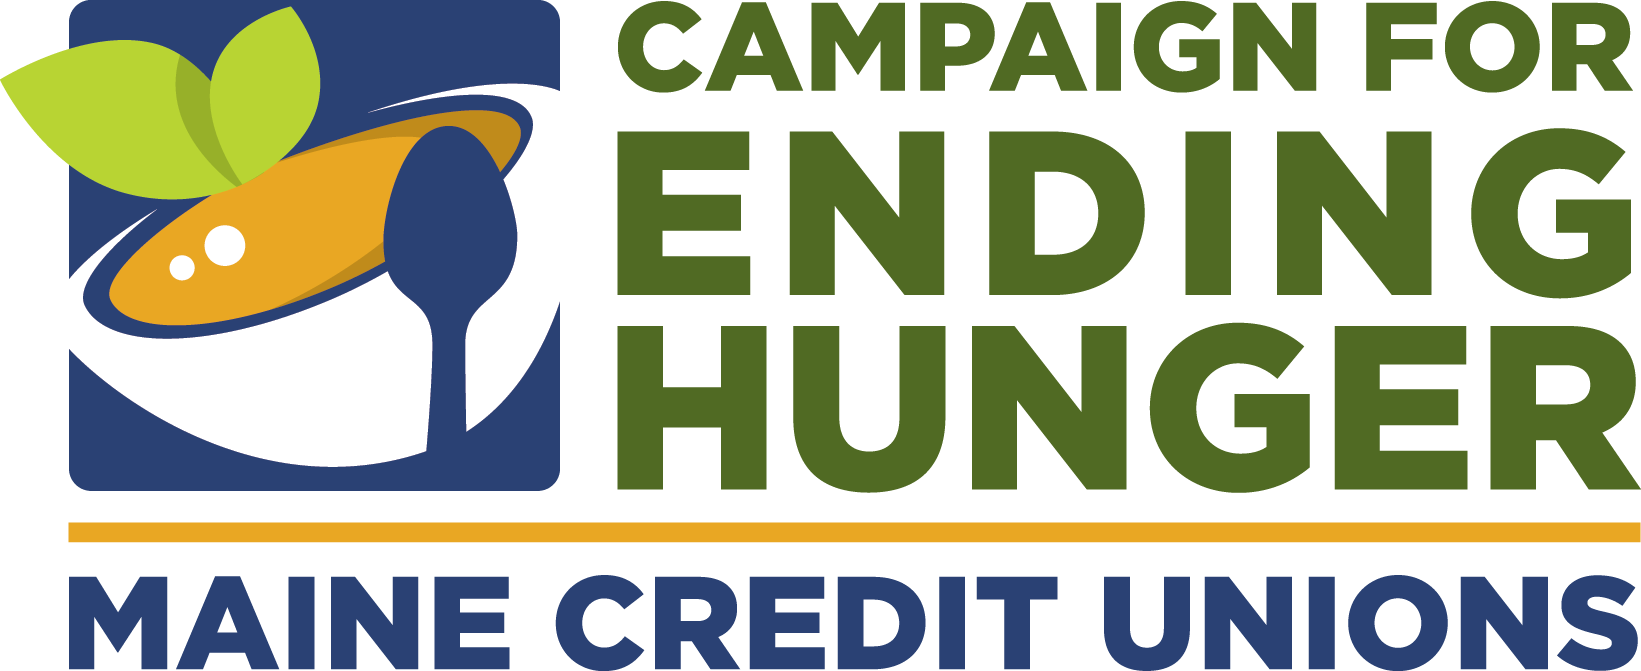 Maine Credit Unions Campaign for Ending Hunger Logo